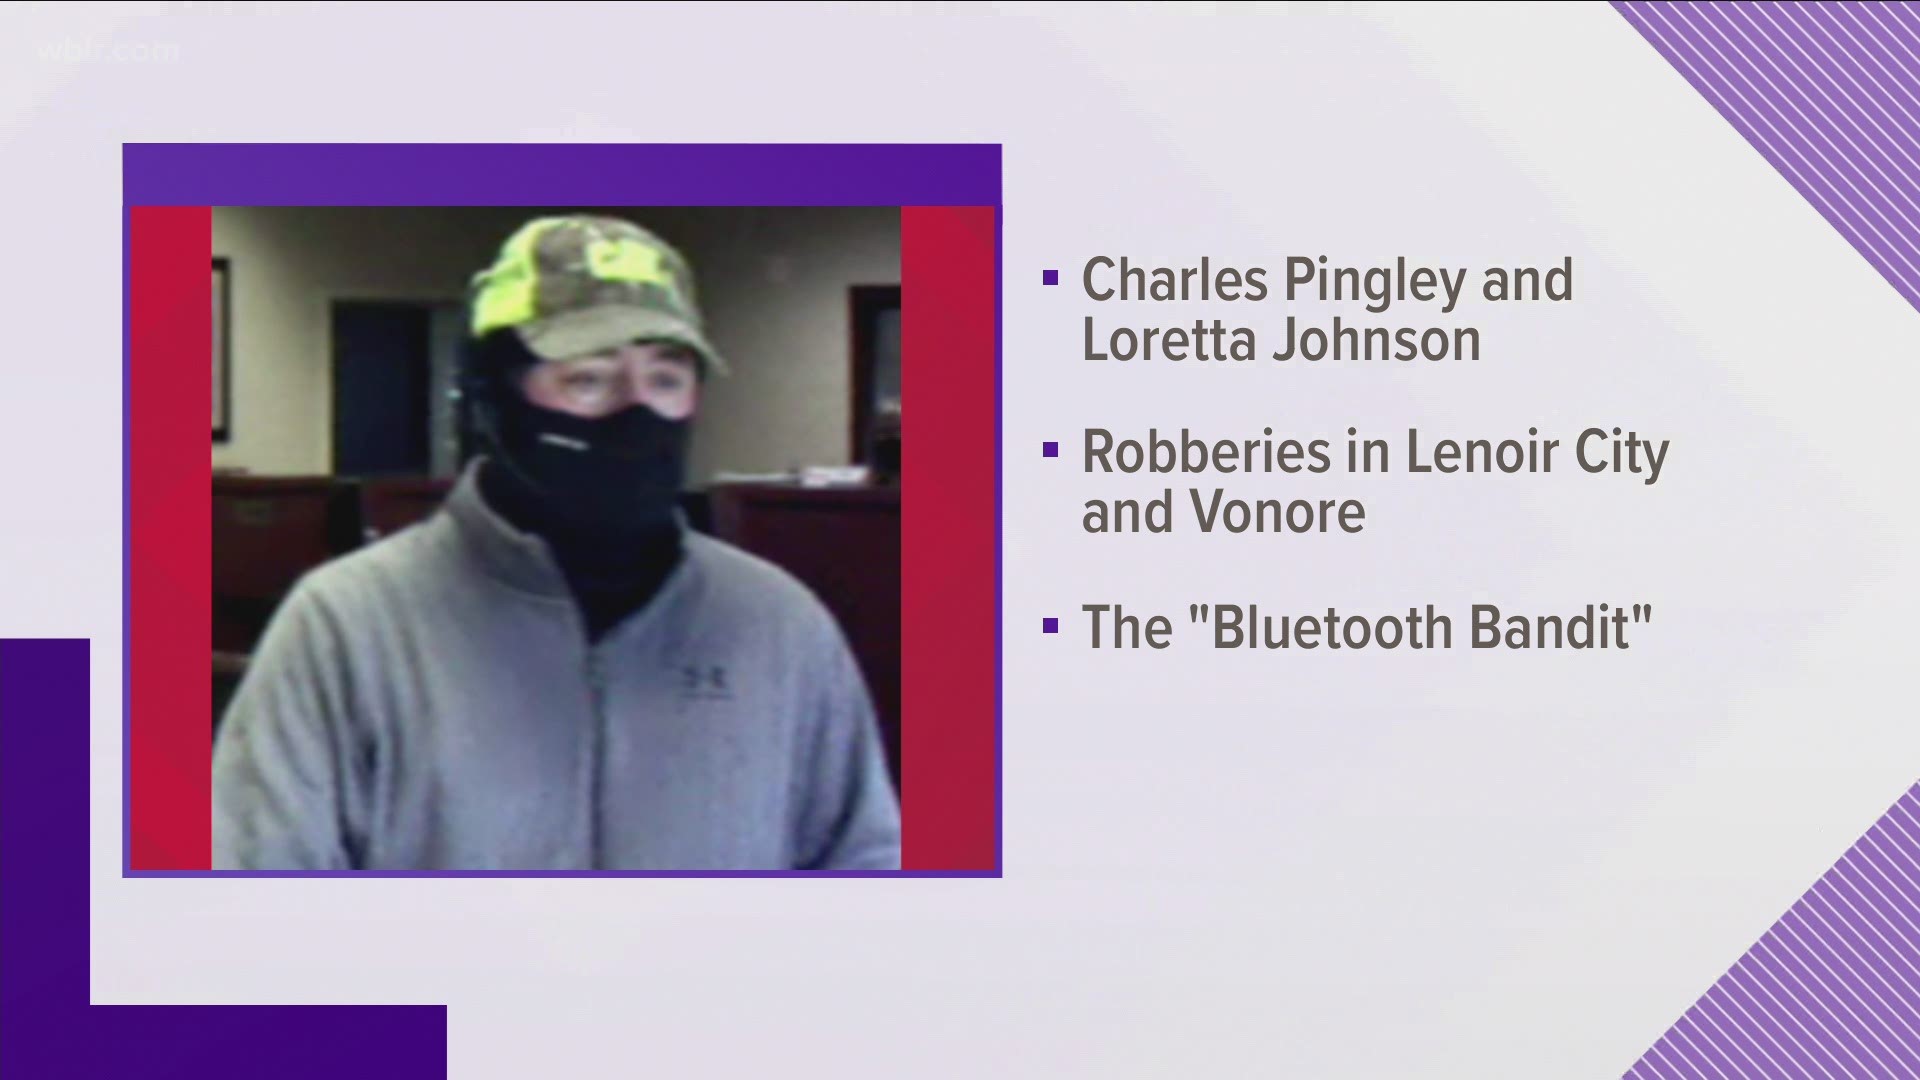 Authorities said the siblings robbed three banks across the region in late 2020.